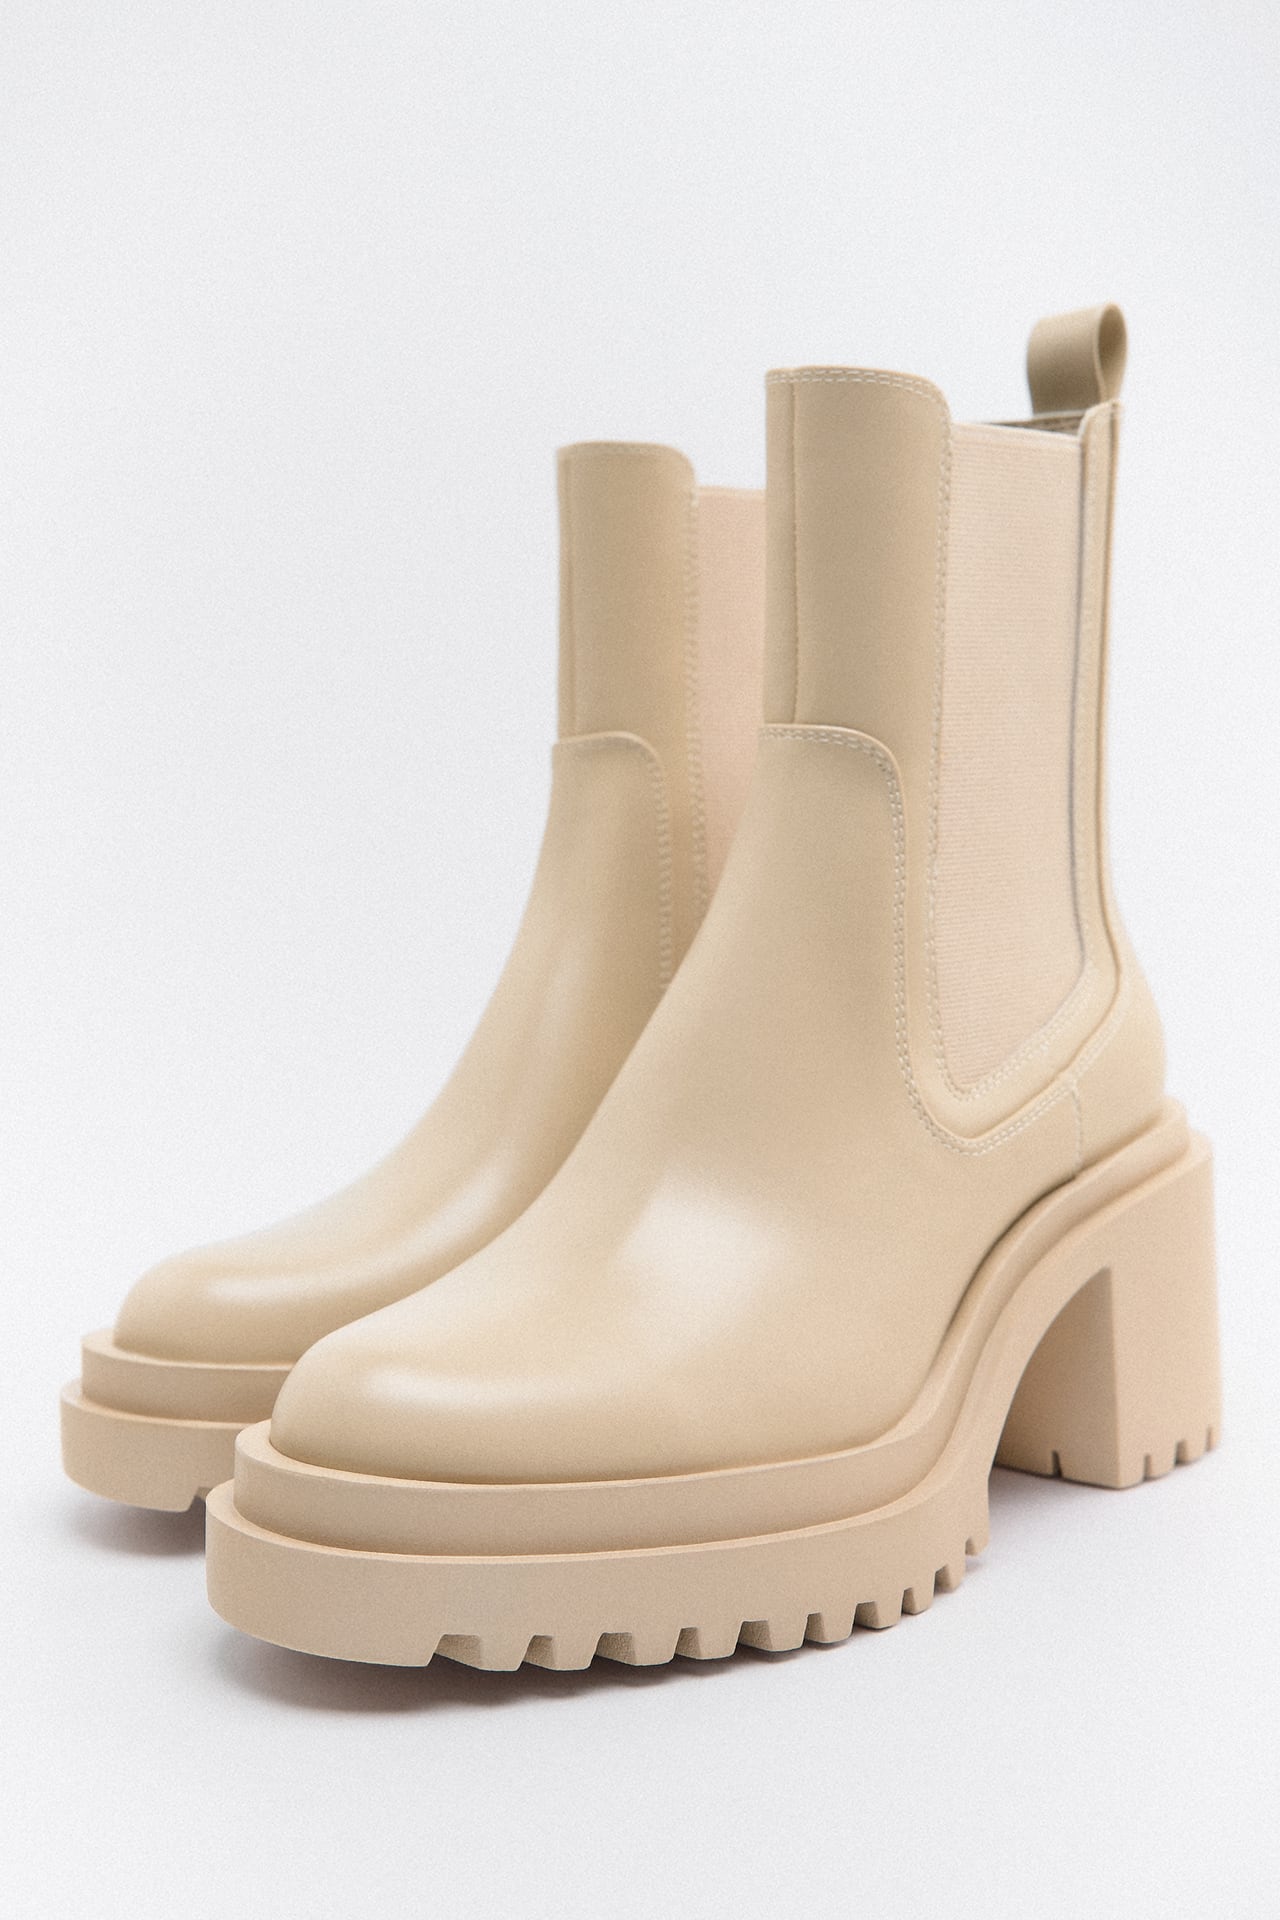 The Zara Boot Trends That Are Going to Be Big in 2023 | Who What Wear UK